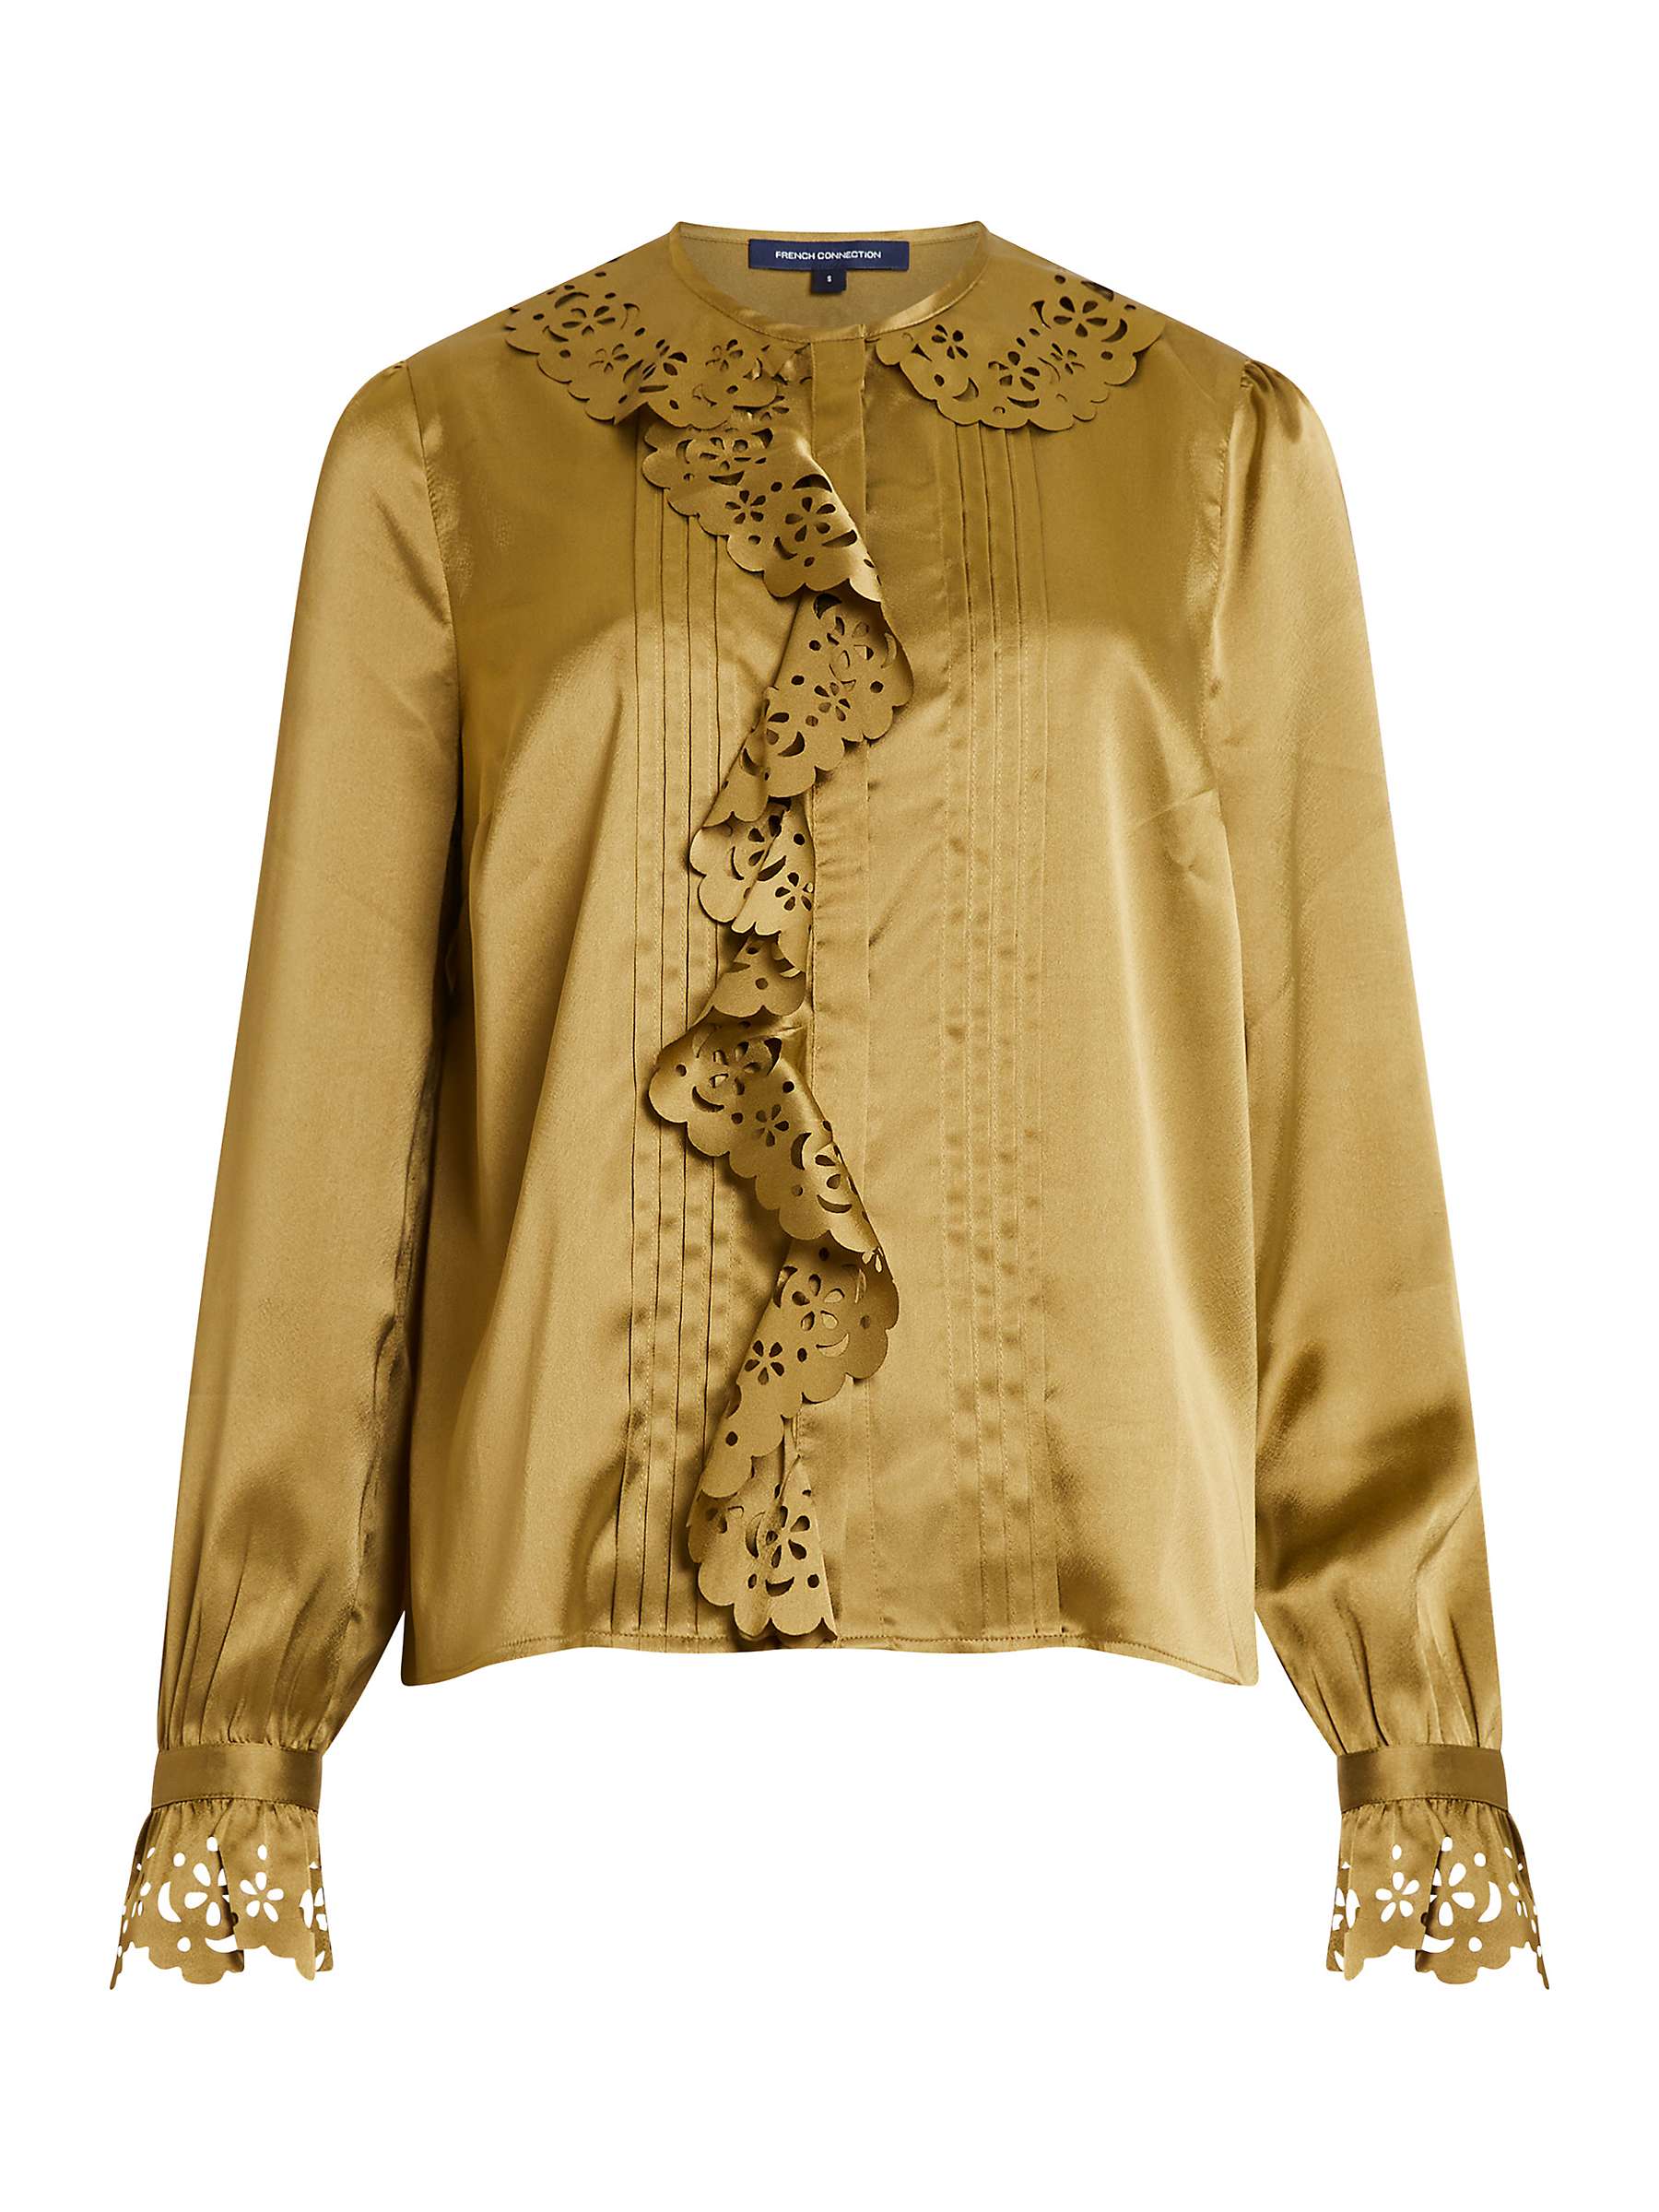 Buy French Connection Aleeya Satin Lace Detail Blouse, Nutria Online at johnlewis.com